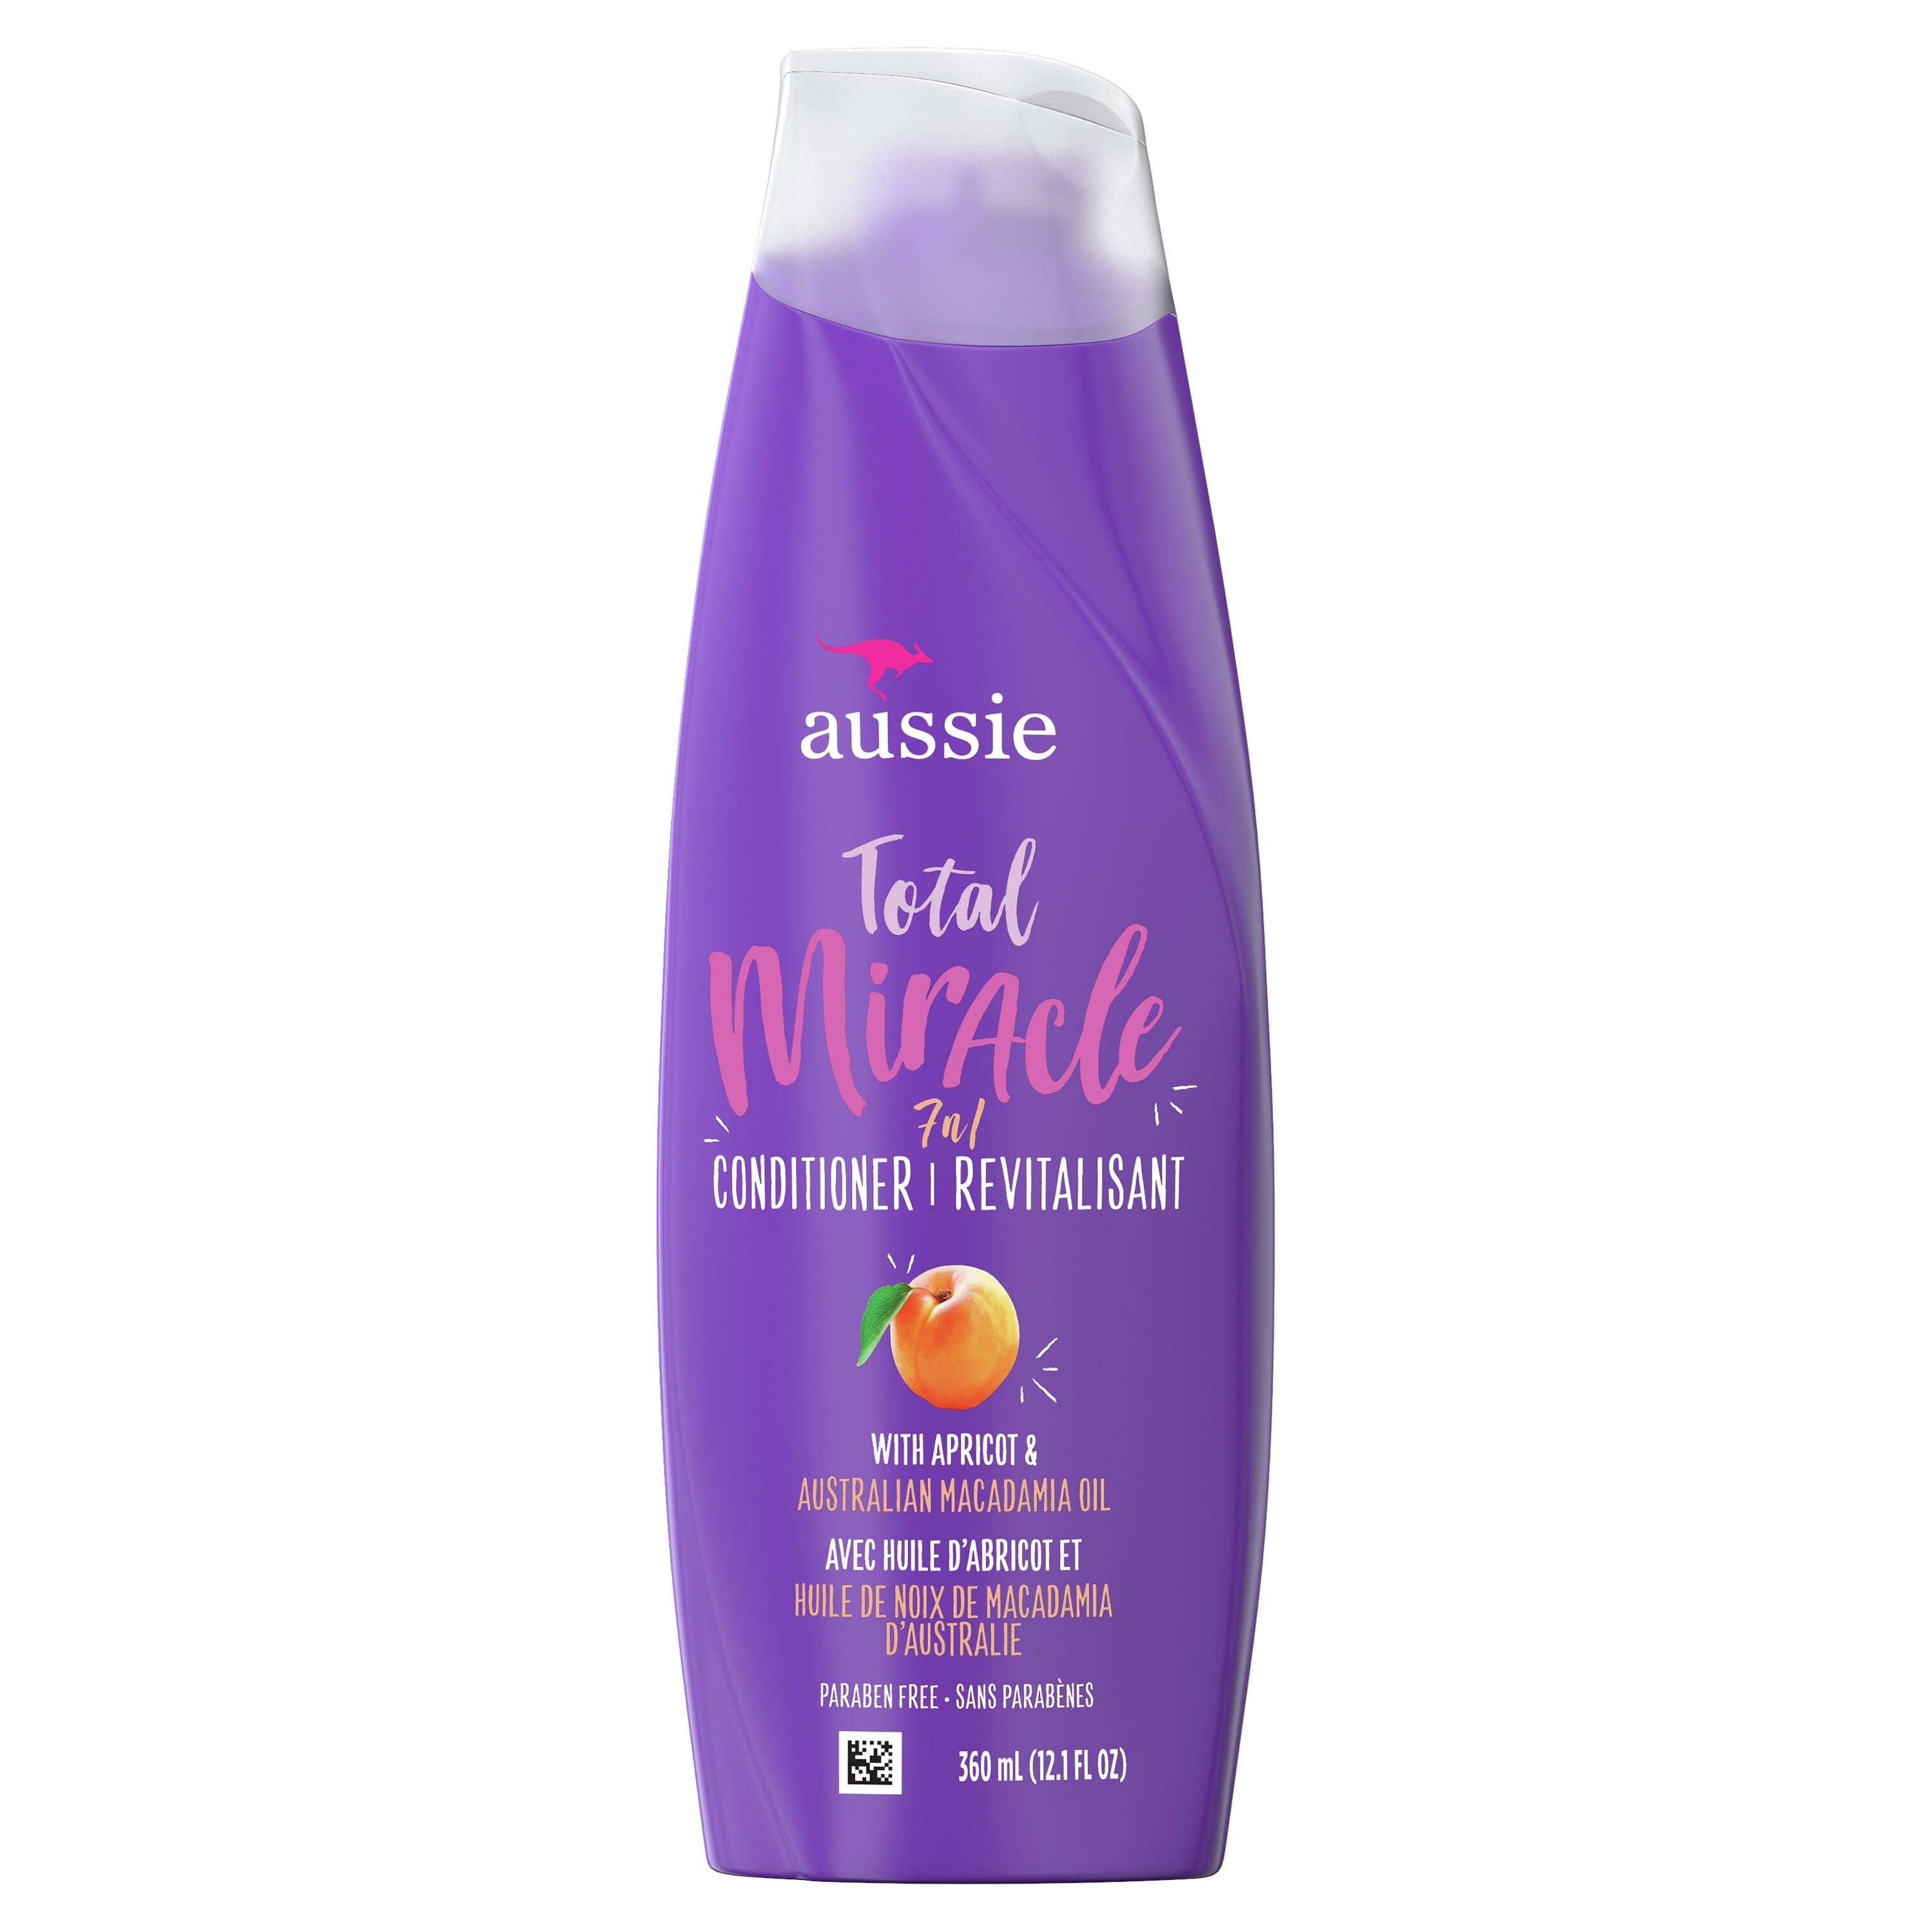 Aussie Total Miracle Conditioner for Damaged Hair, 12.1 fl oz - image 1 of 9